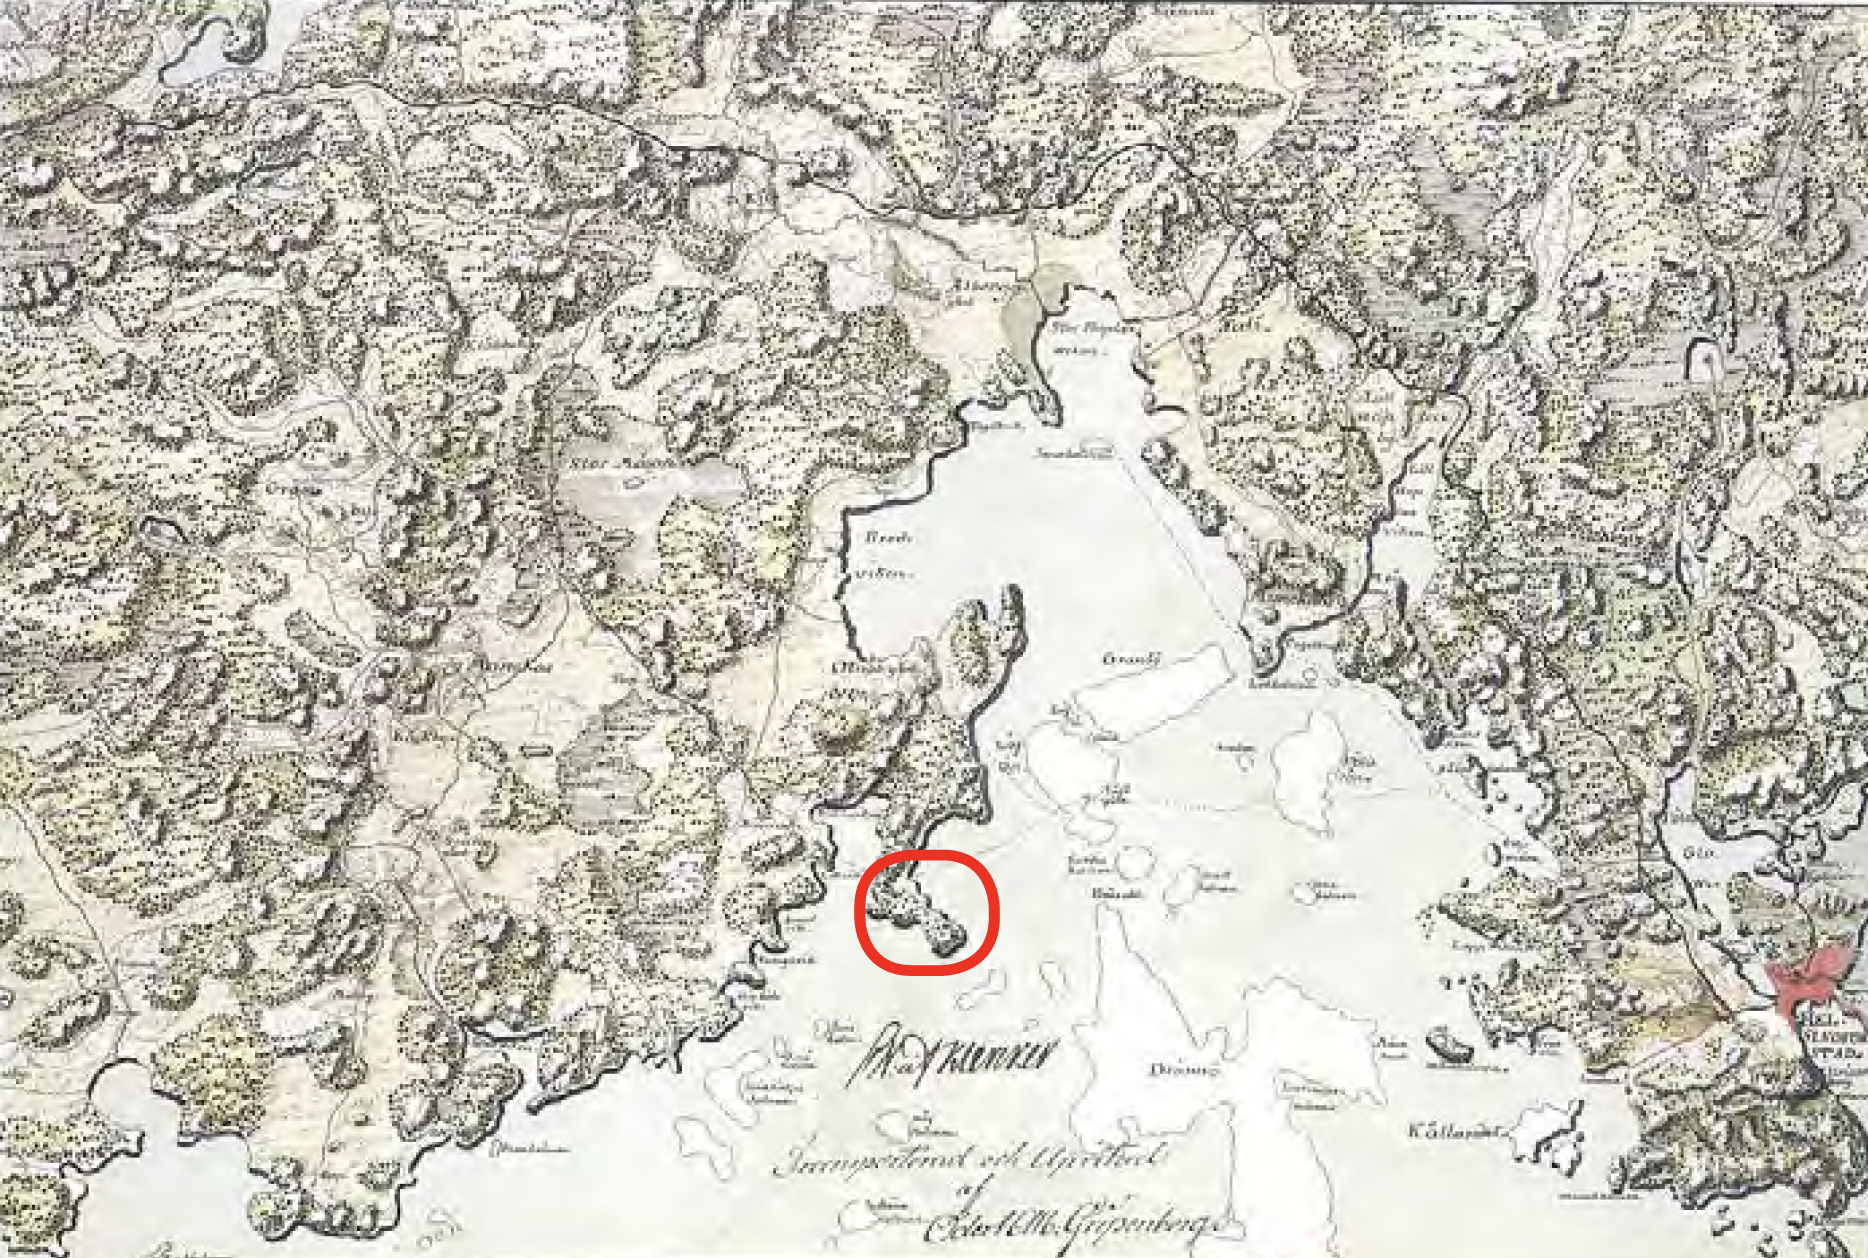 Location on a historical map